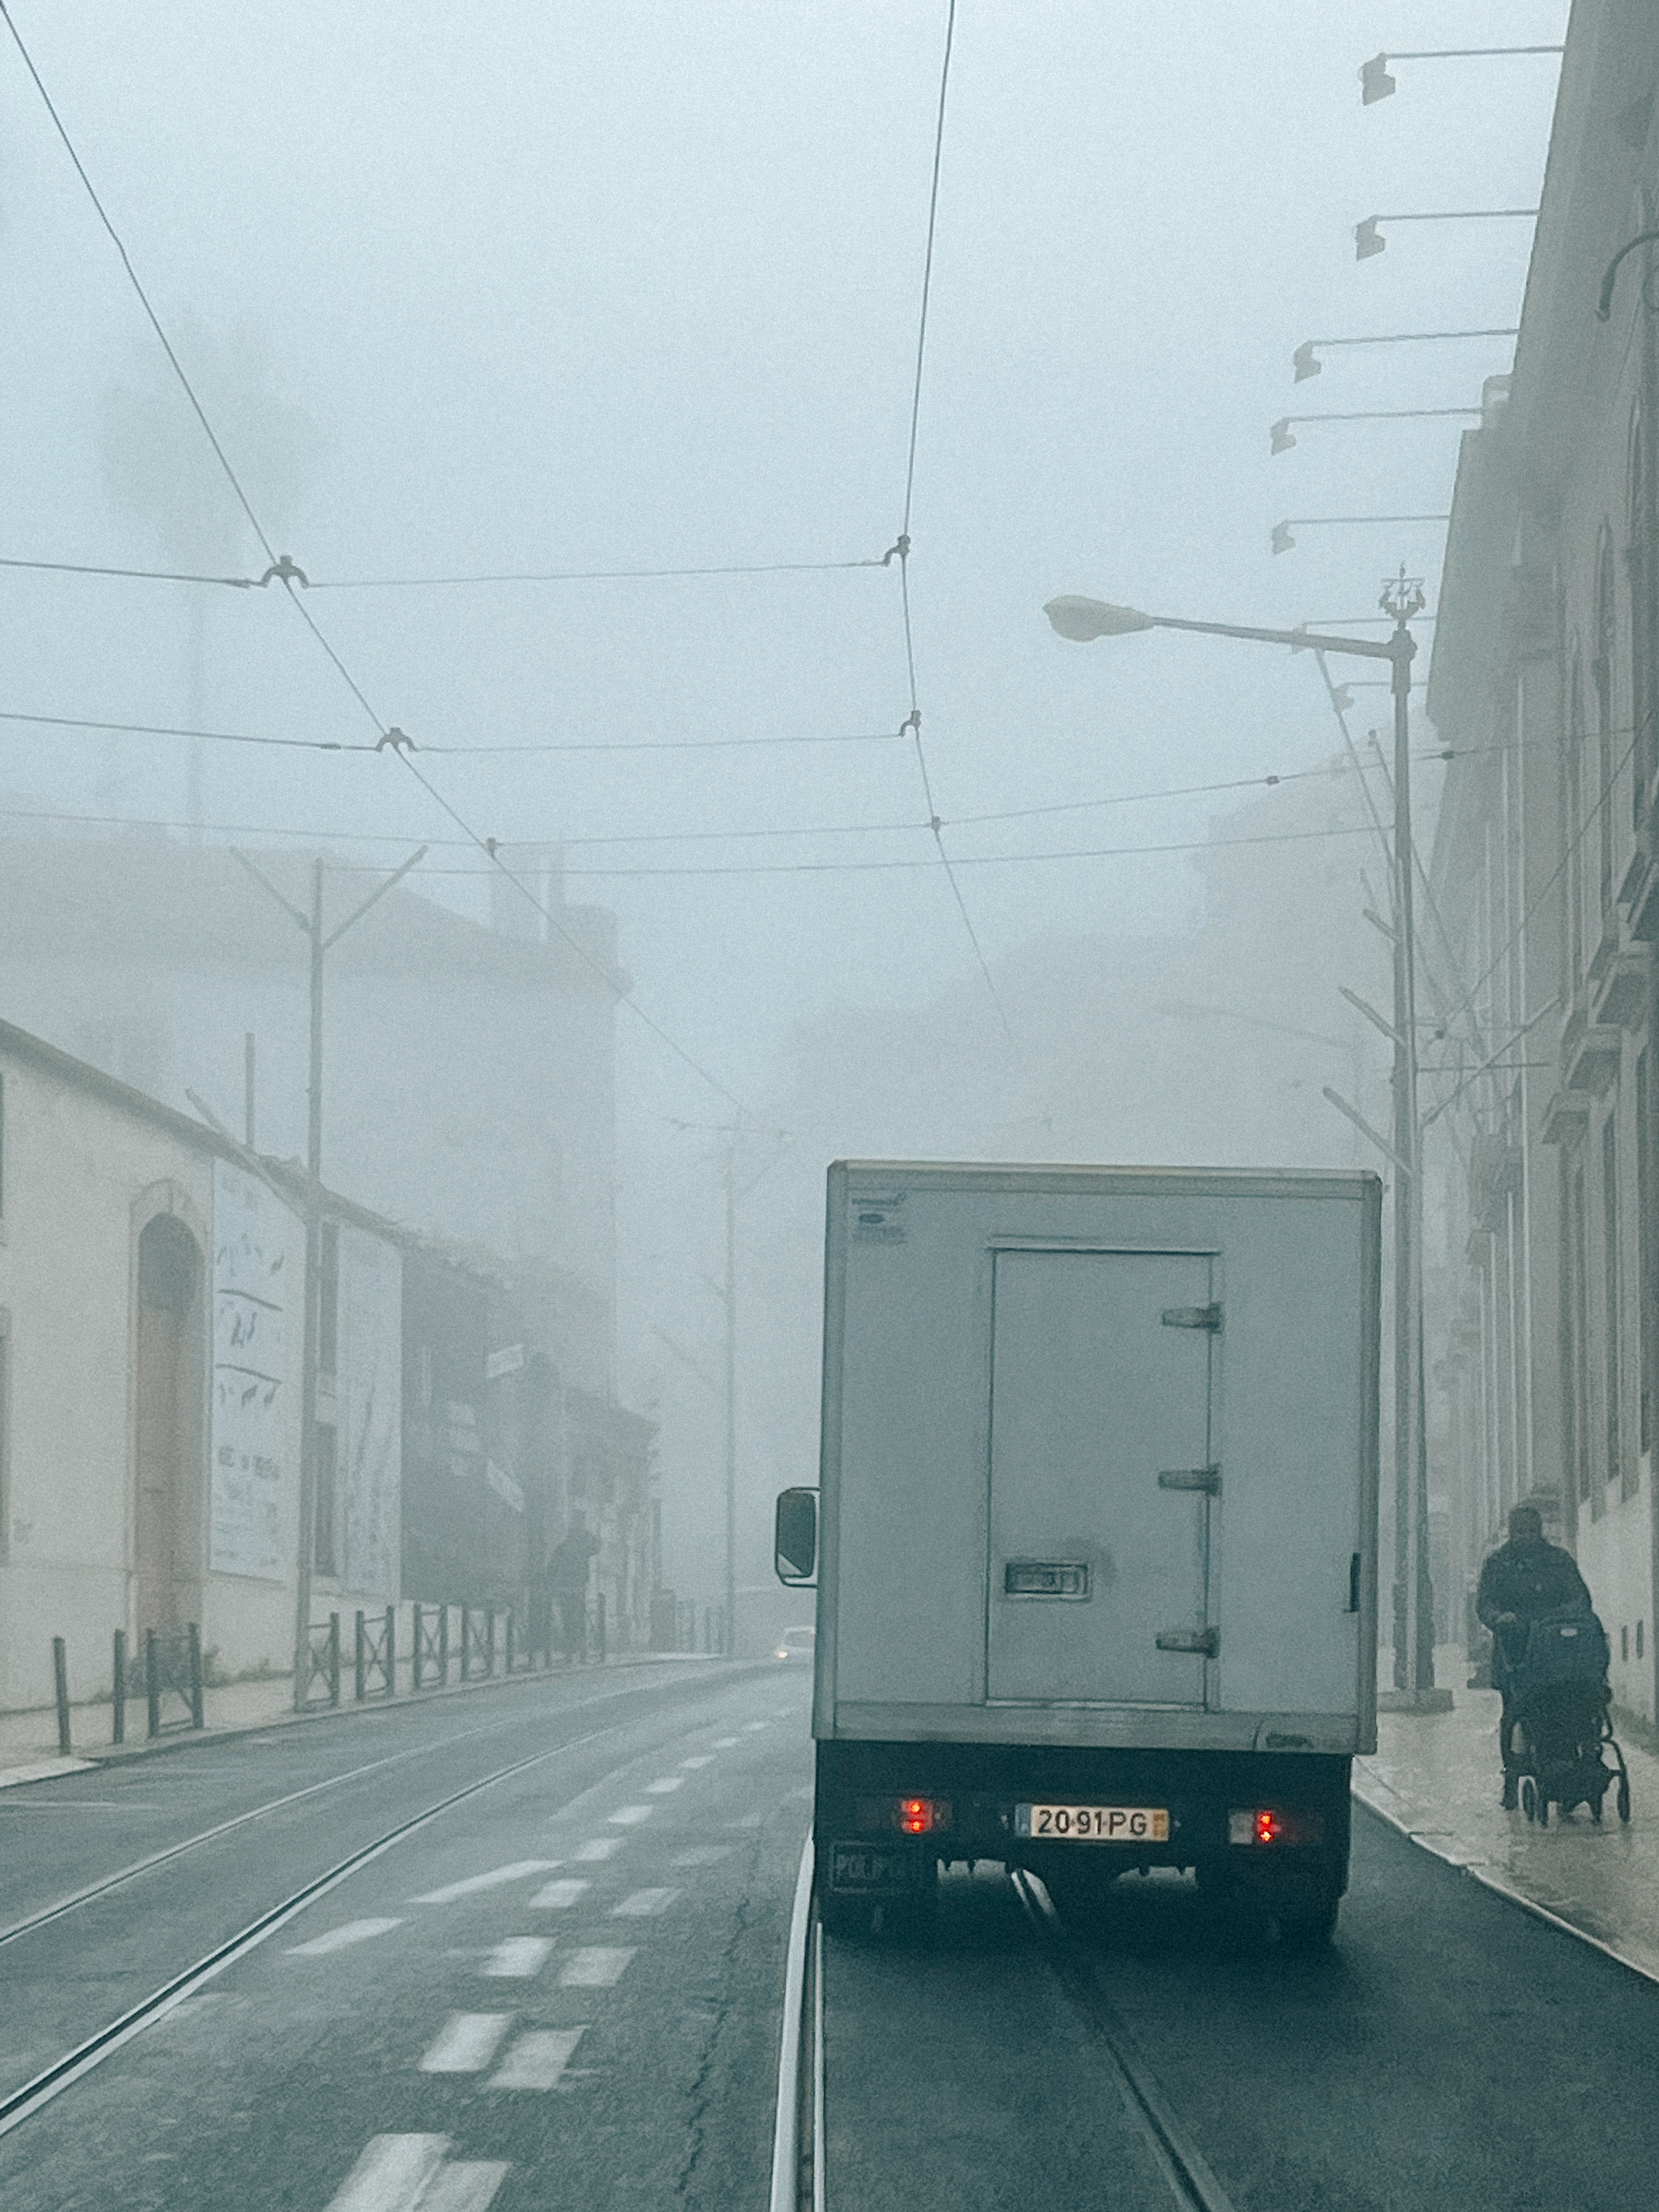 A foggy street scene with a delivery truck in the foreground and a person pushing a stroller in the background, with buildings and streetlamps lining the side of the road.